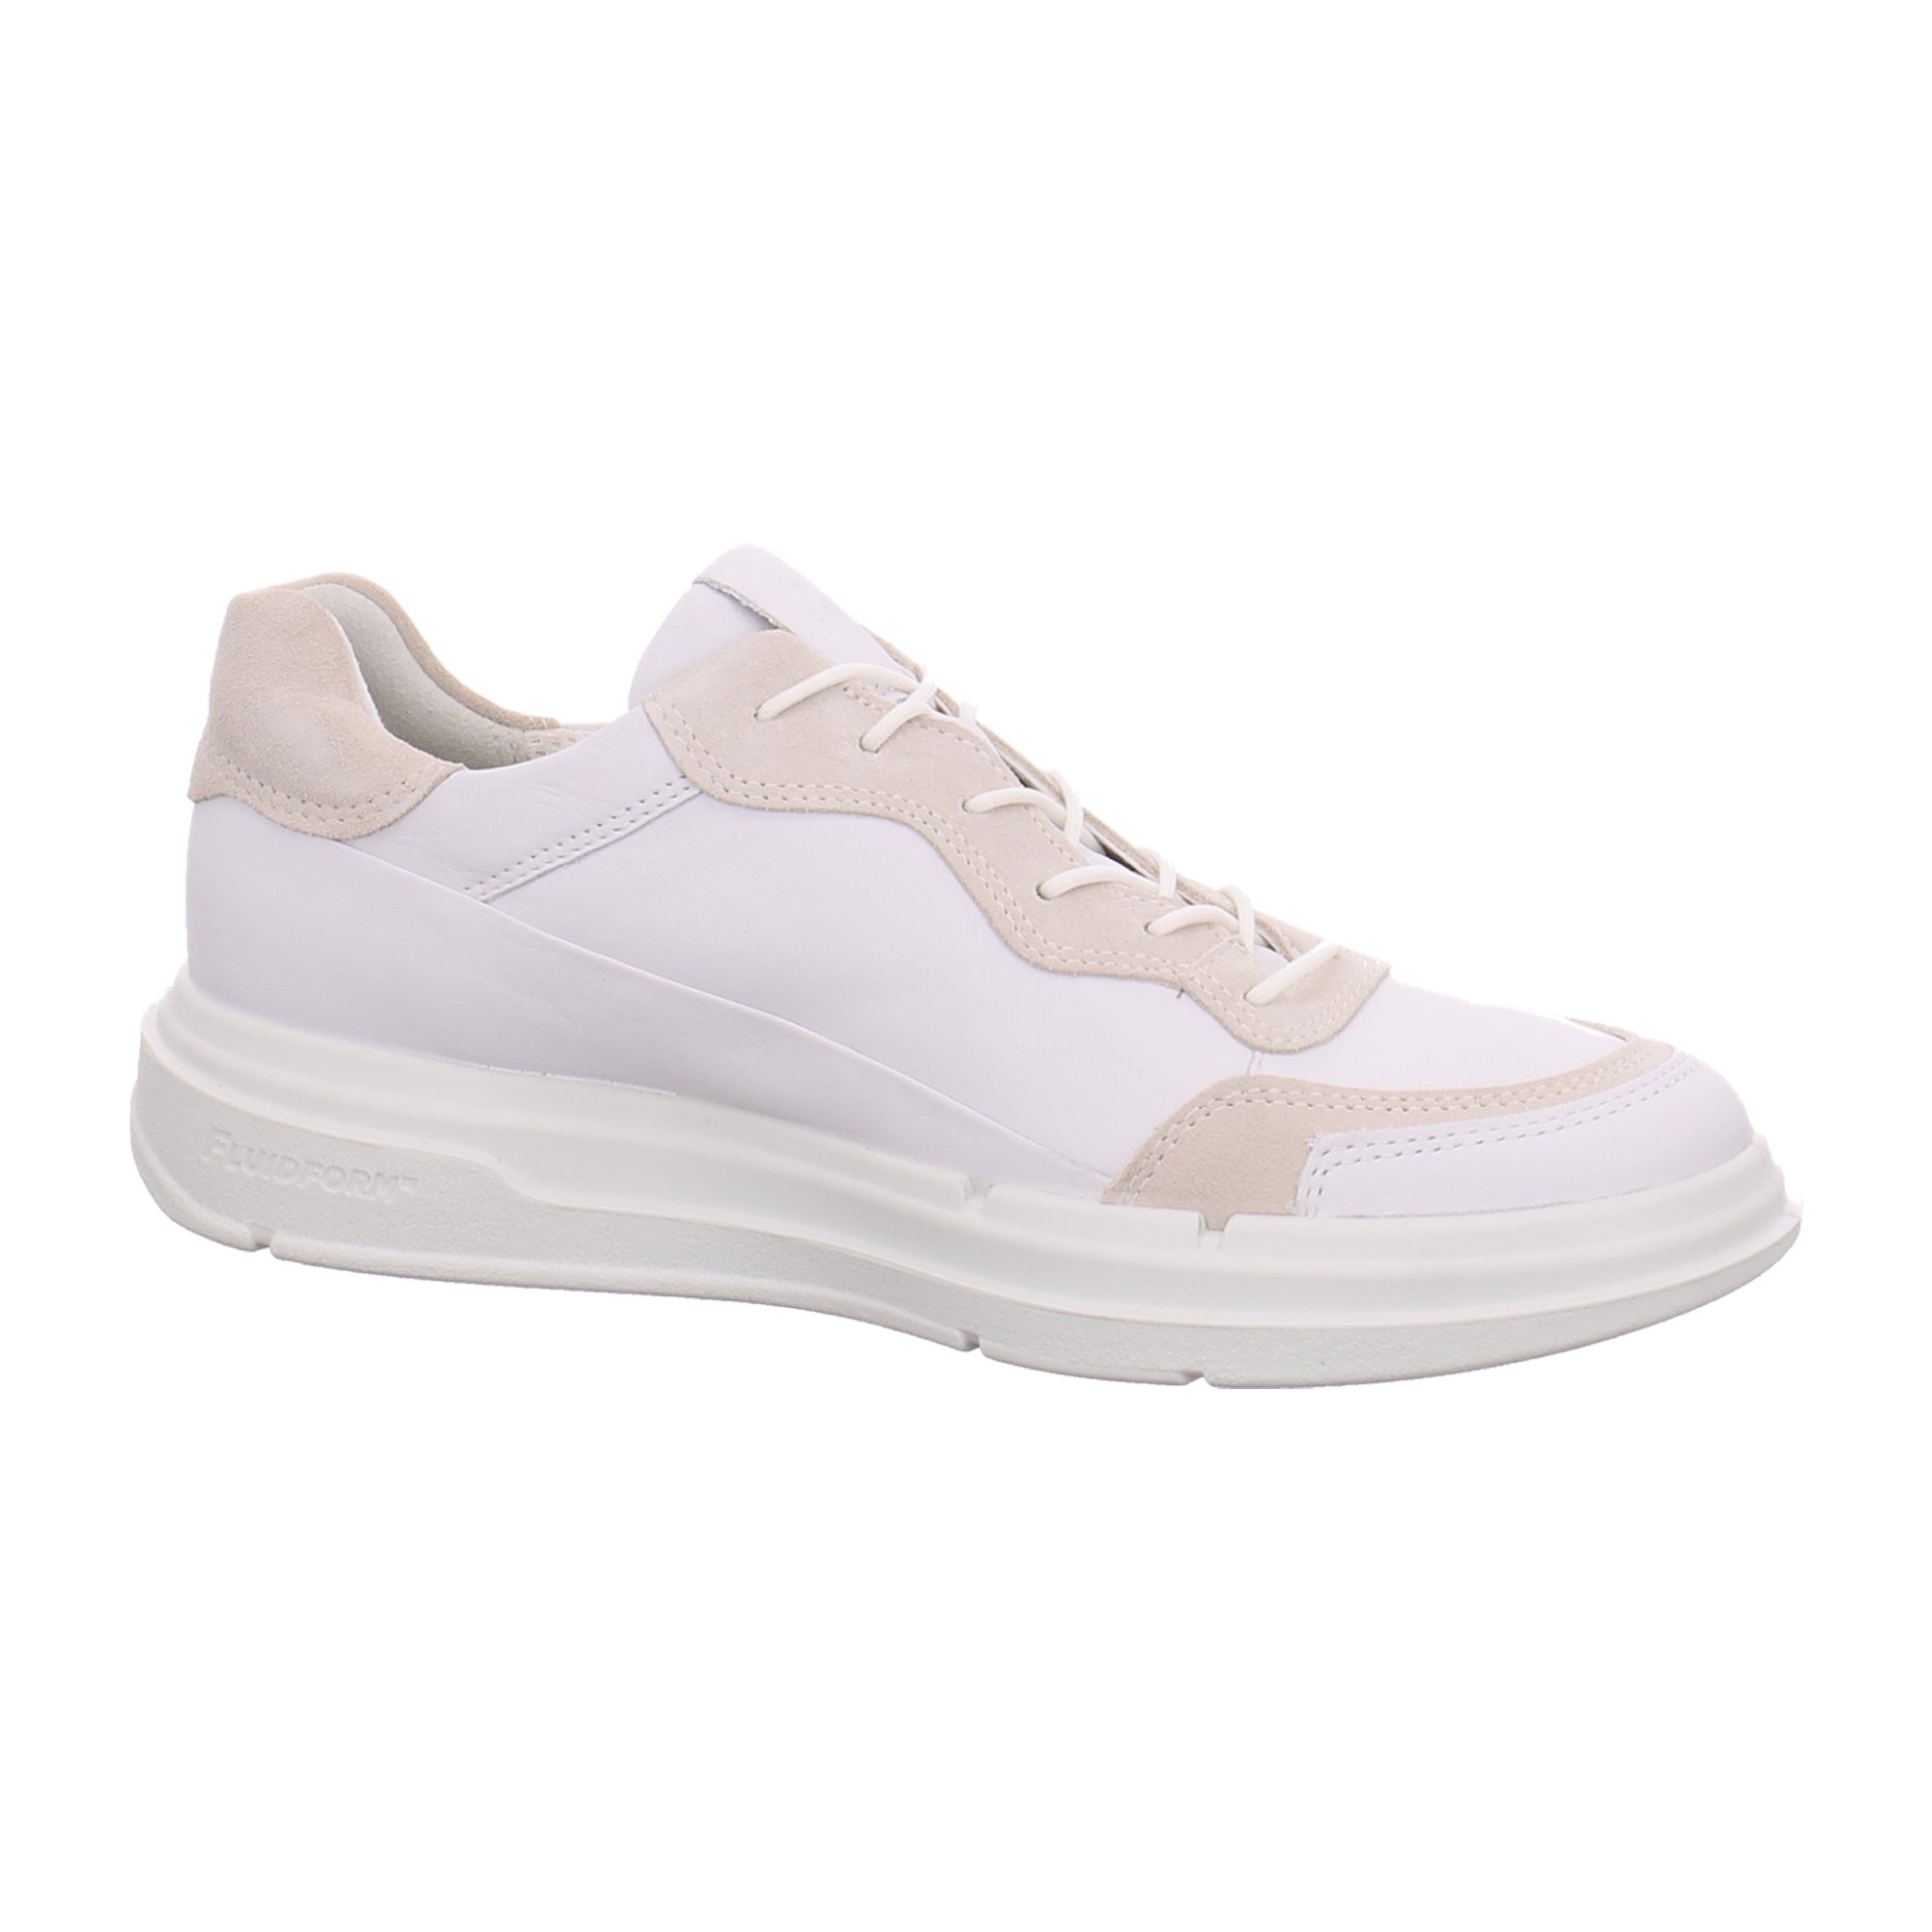 Ecco 420403 Women's White Sneakers - Stylish & Durable Casual Shoes